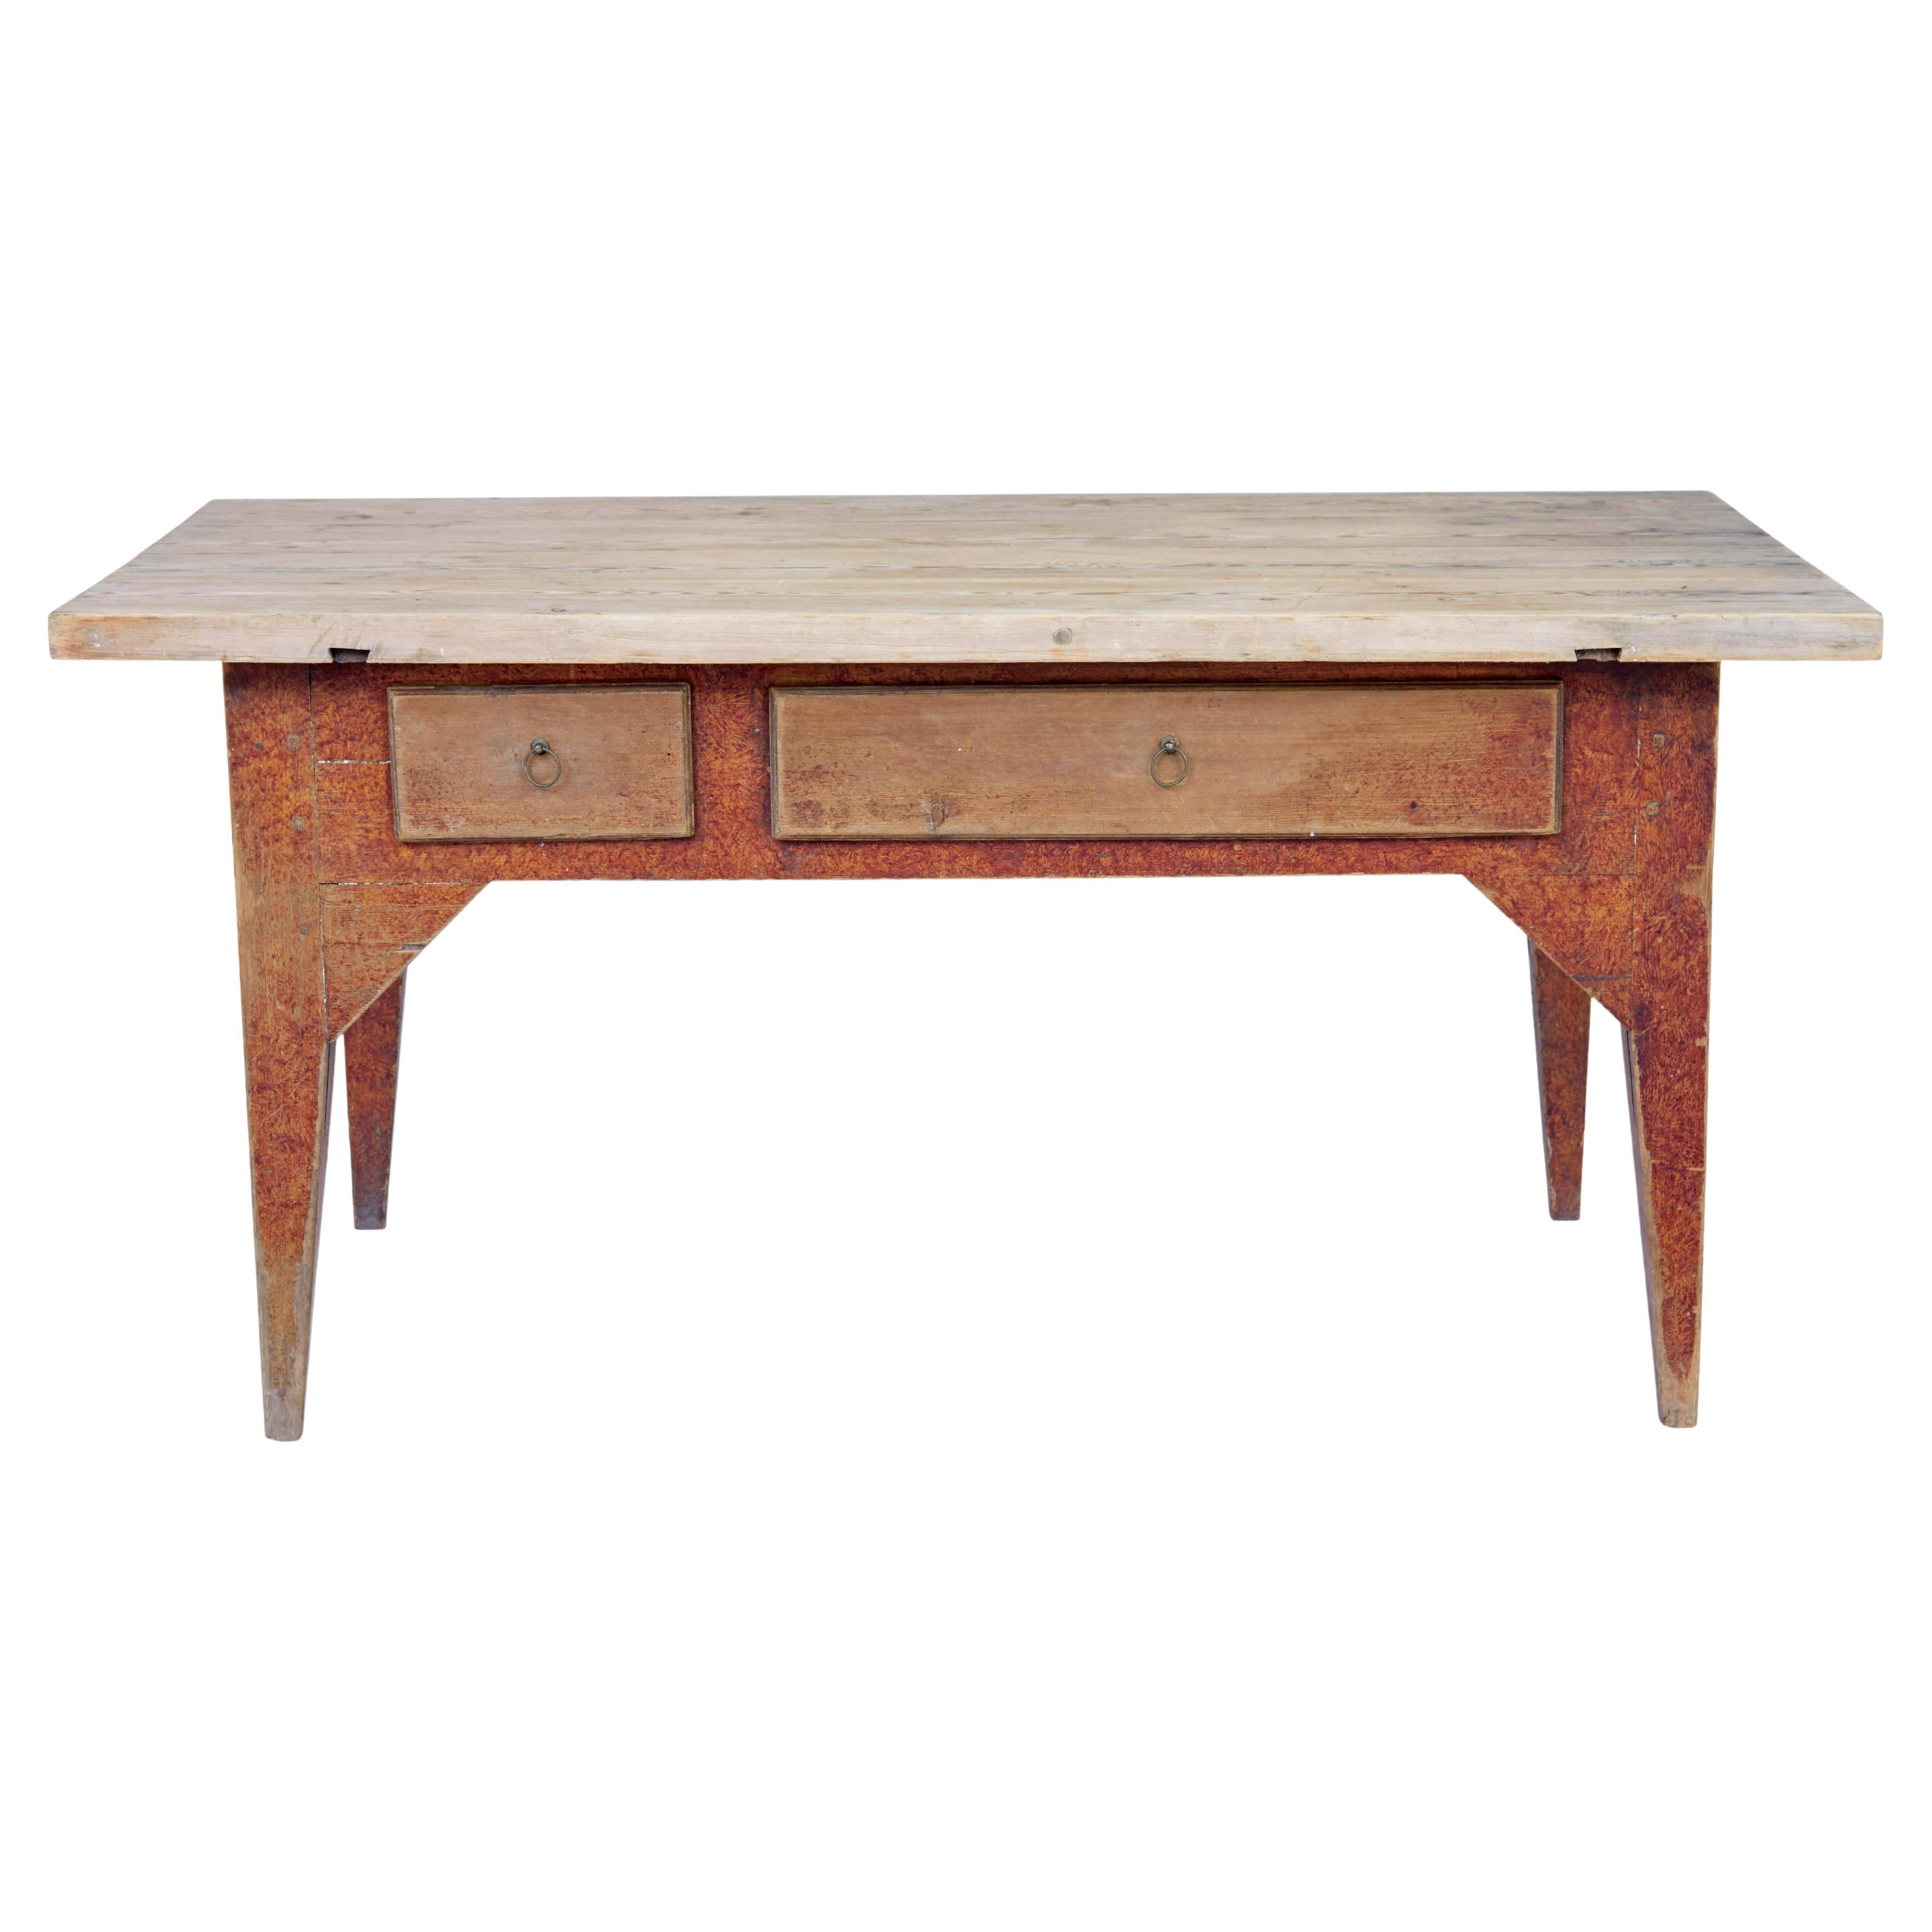 Mid 19th Century rustic painted pine kitchen table For Sale